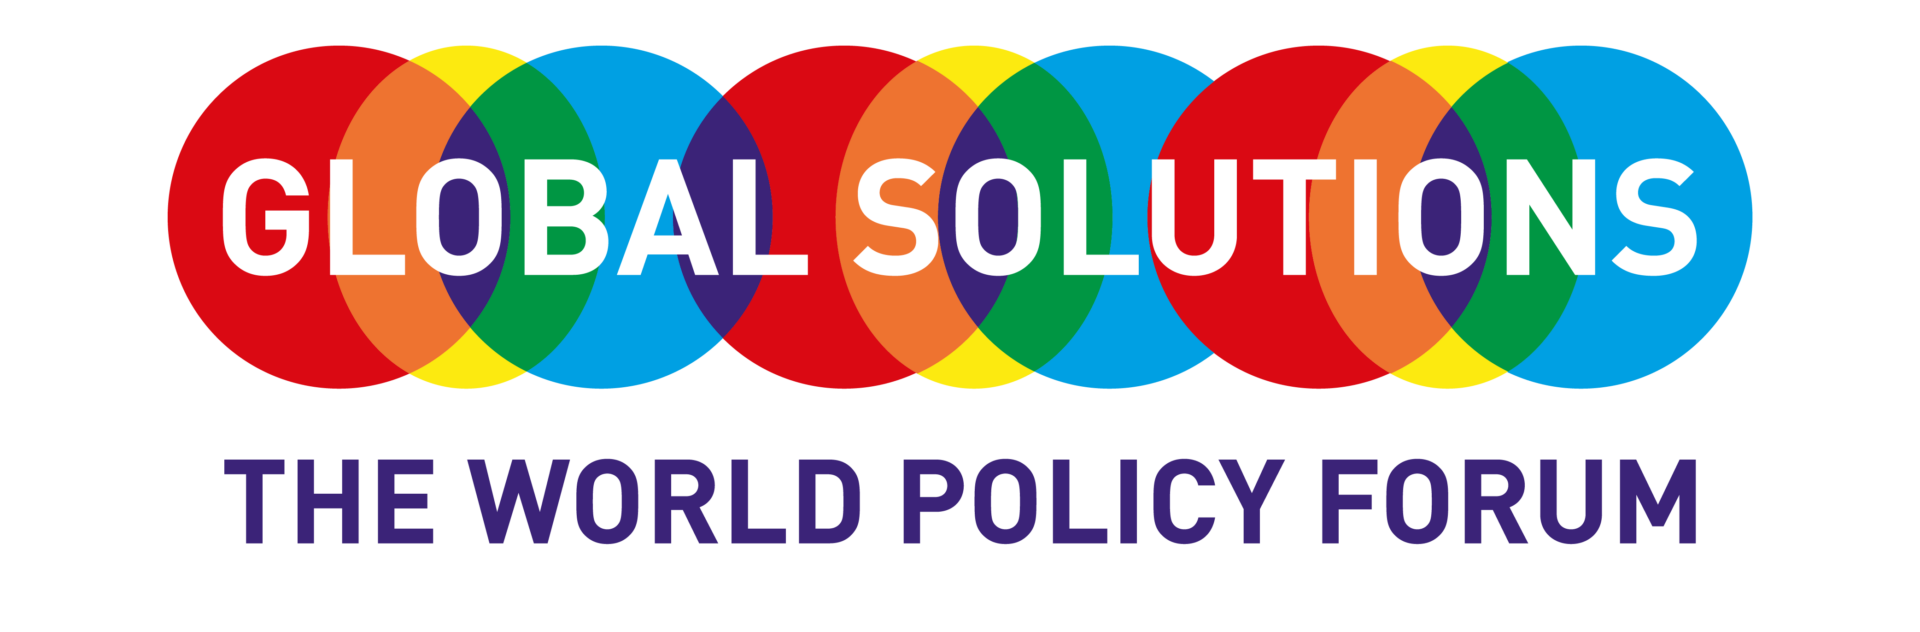 Global Solutions Initiative | Global Solutions Summit